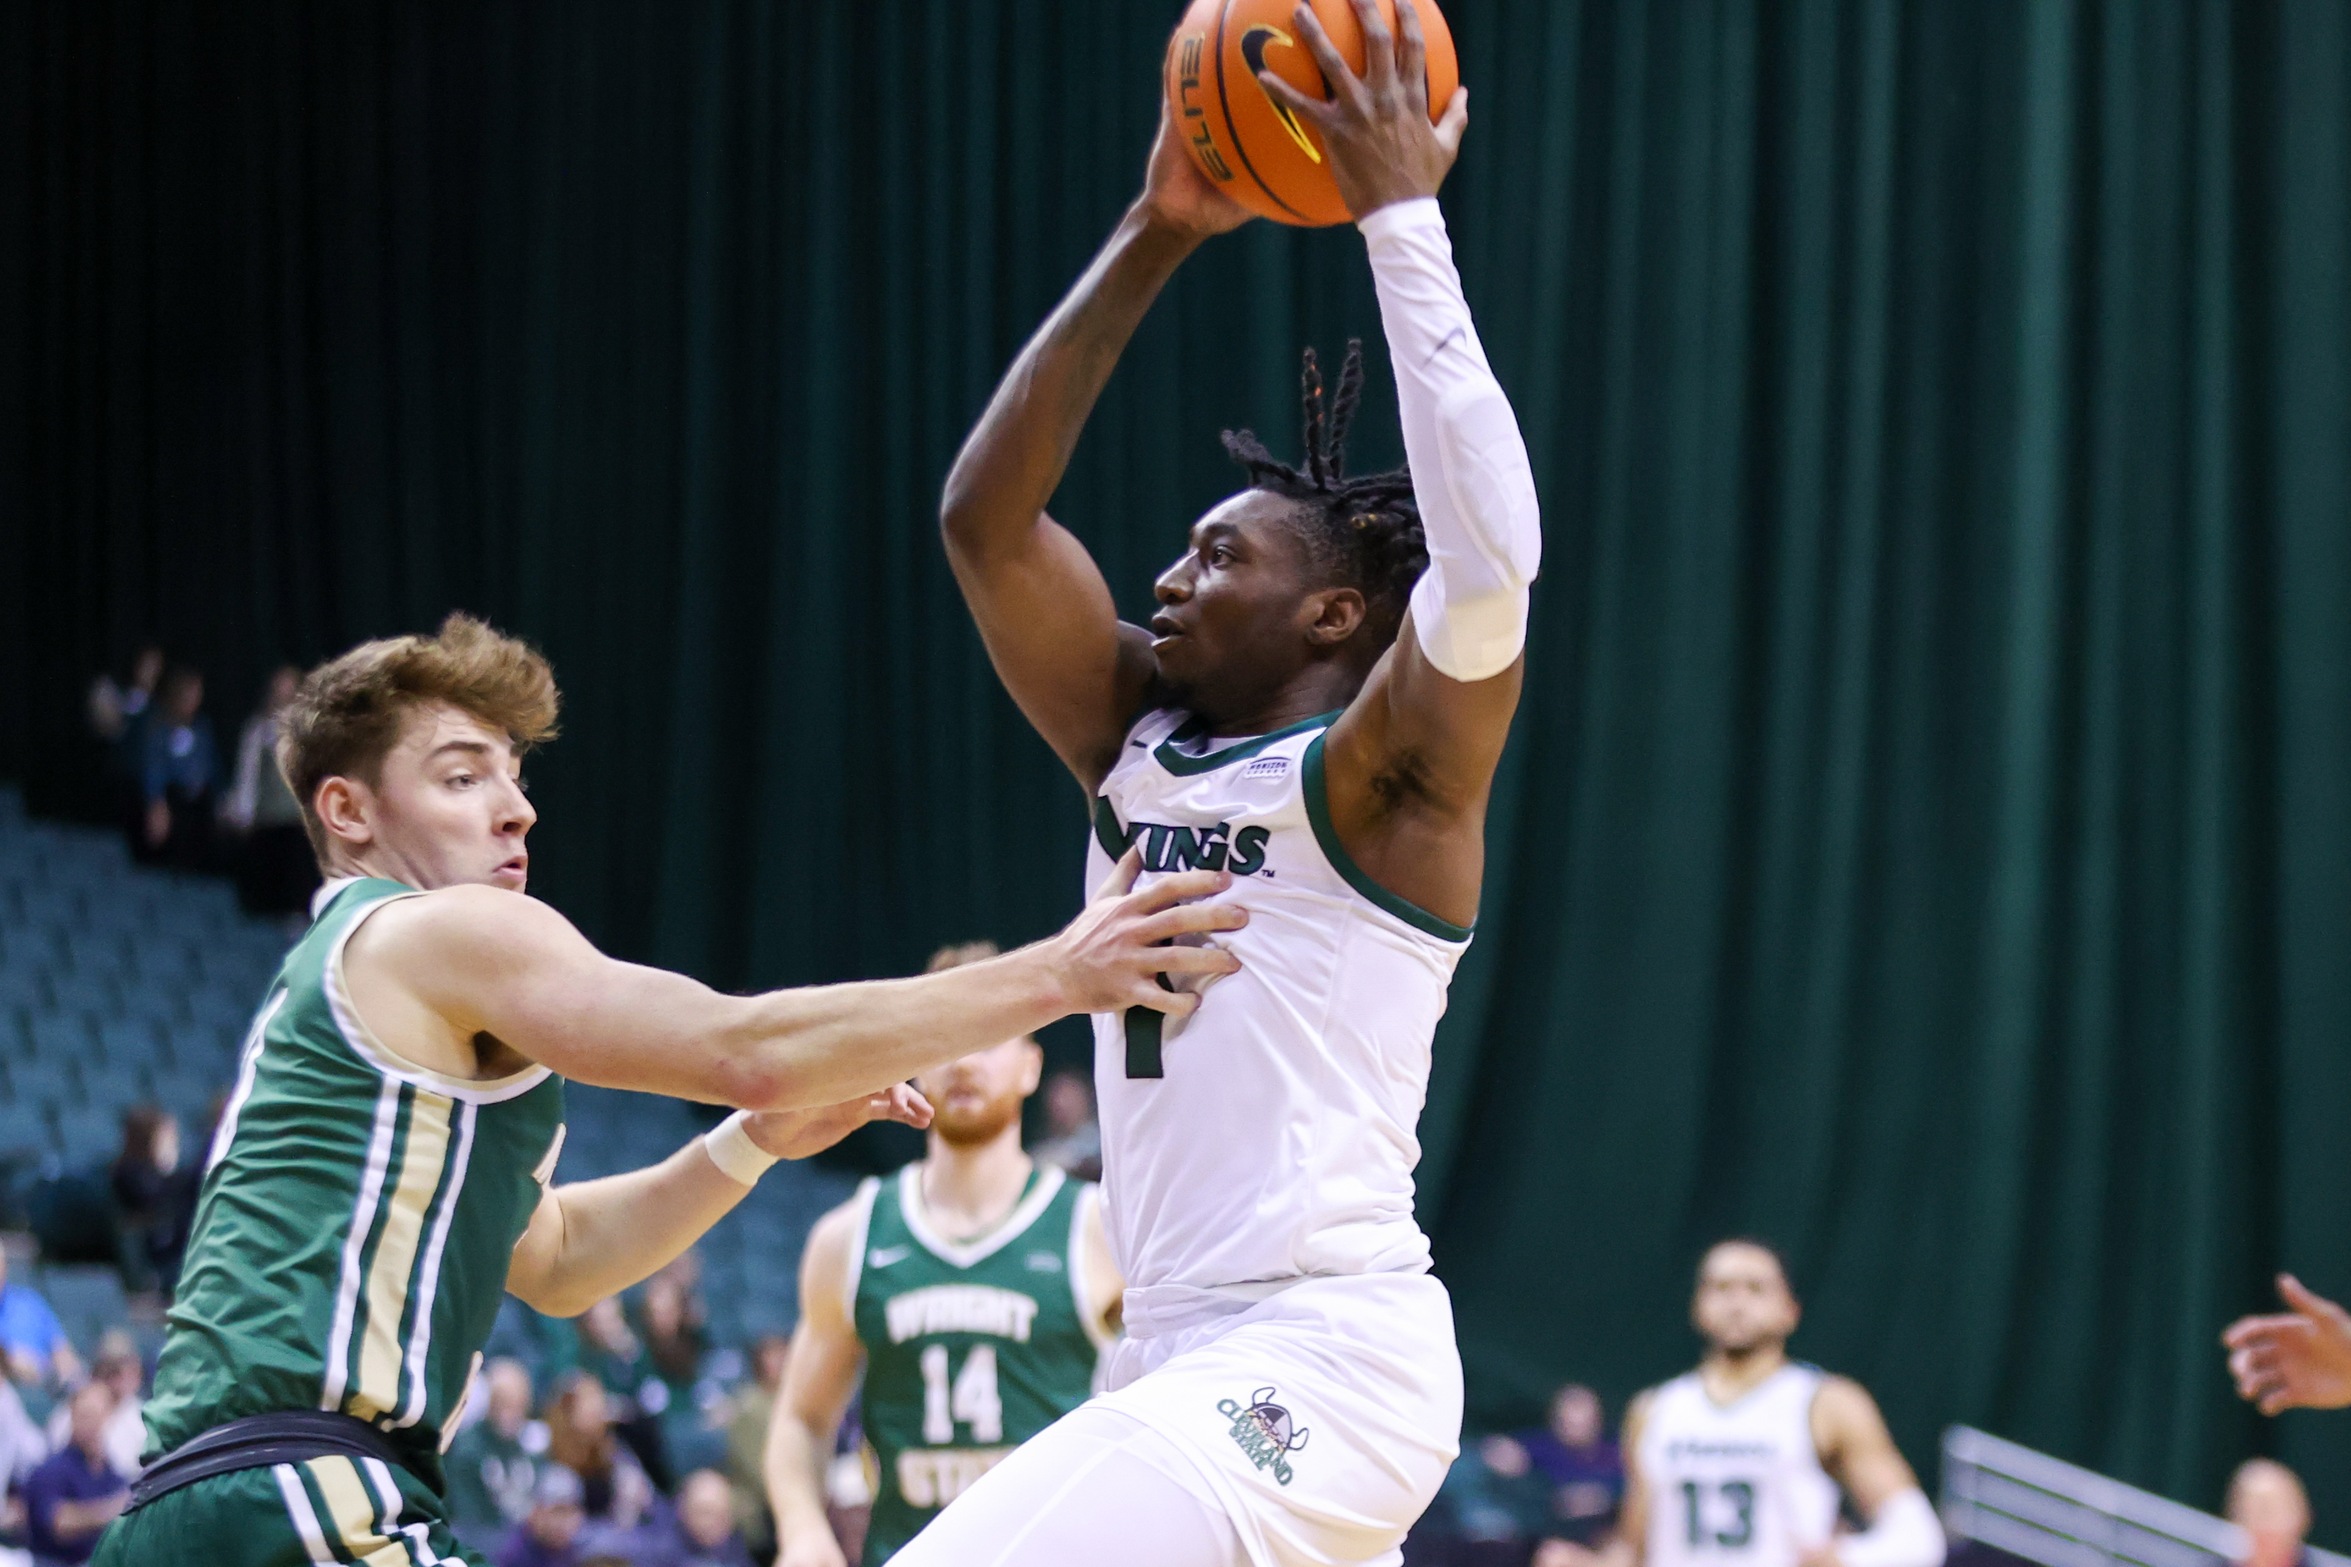 Cleveland State Men’s Basketball Drops Overtime Heartbreaker to Wright State